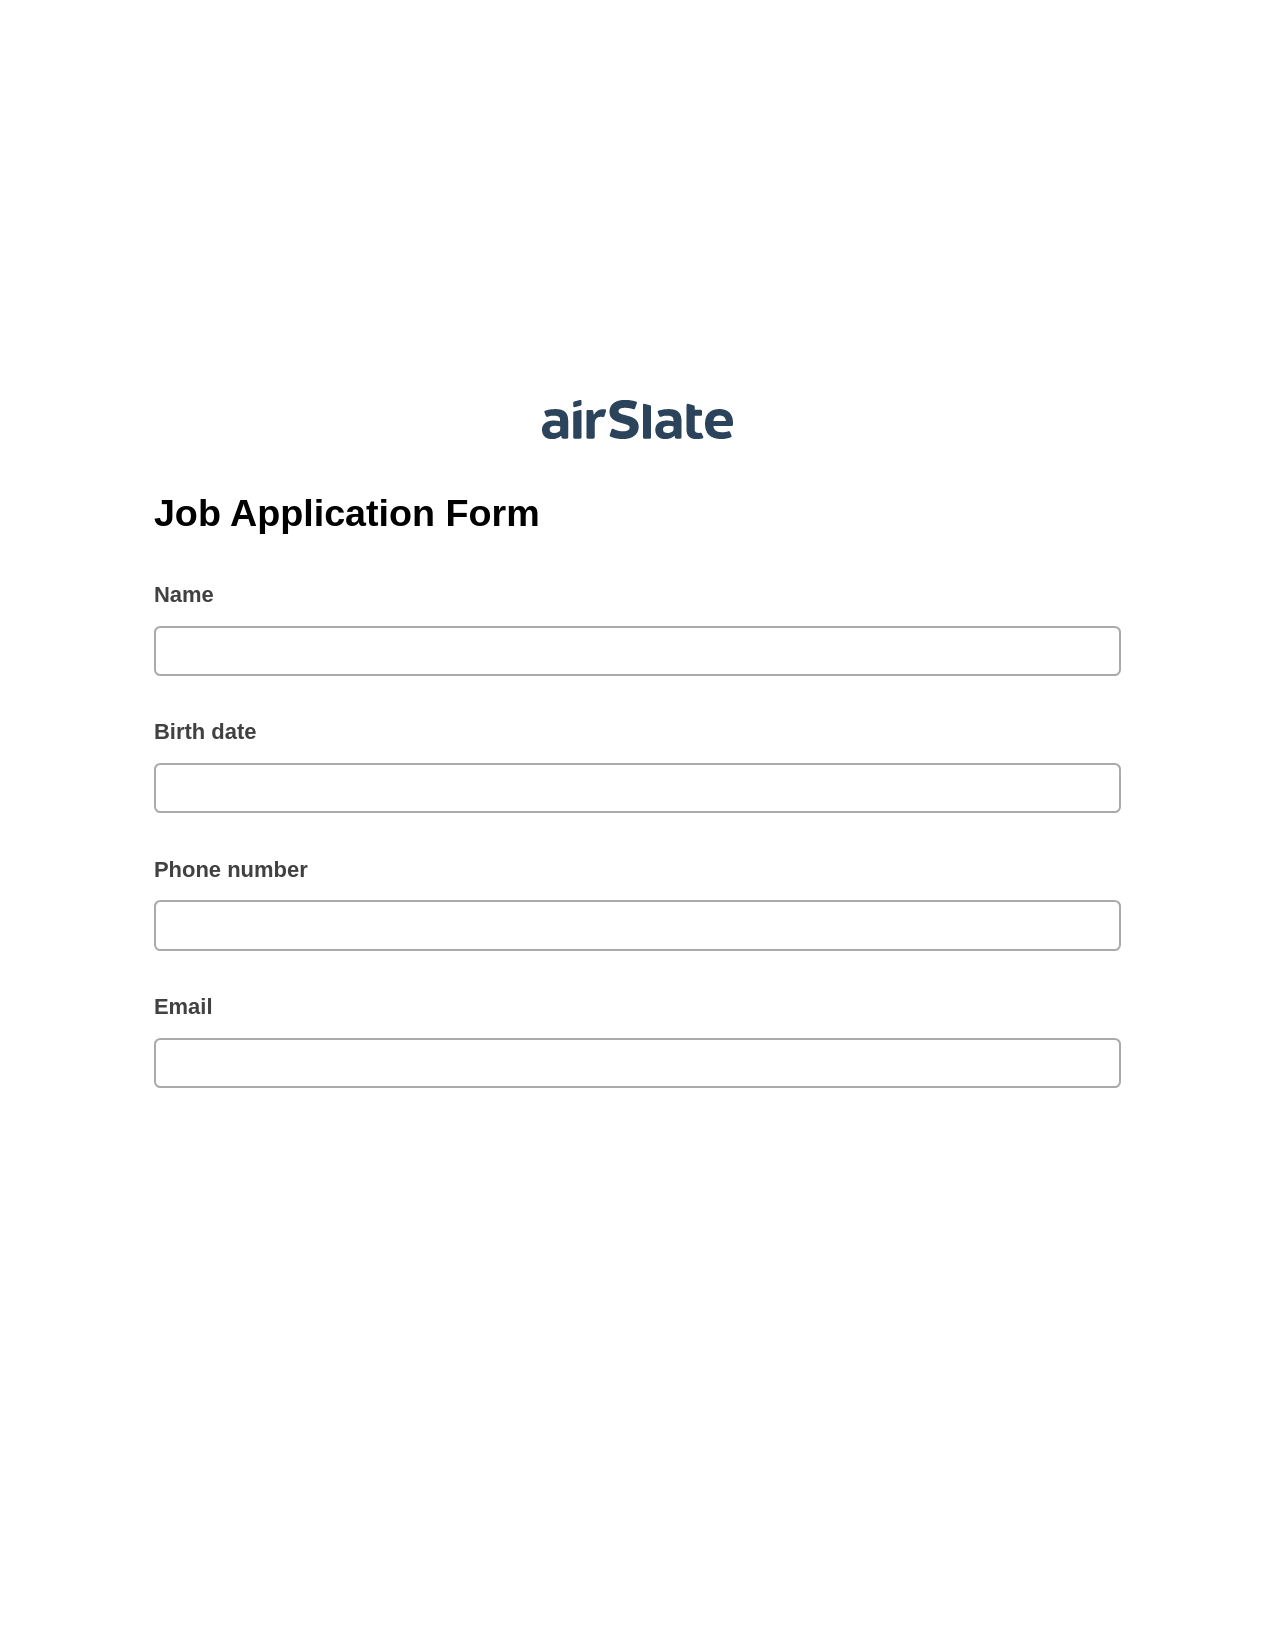 Multirole Job Application Form Pre-fill from Office 365 Excel Bot, Assign Slate Name Bot, Archive to SharePoint Folder Bot